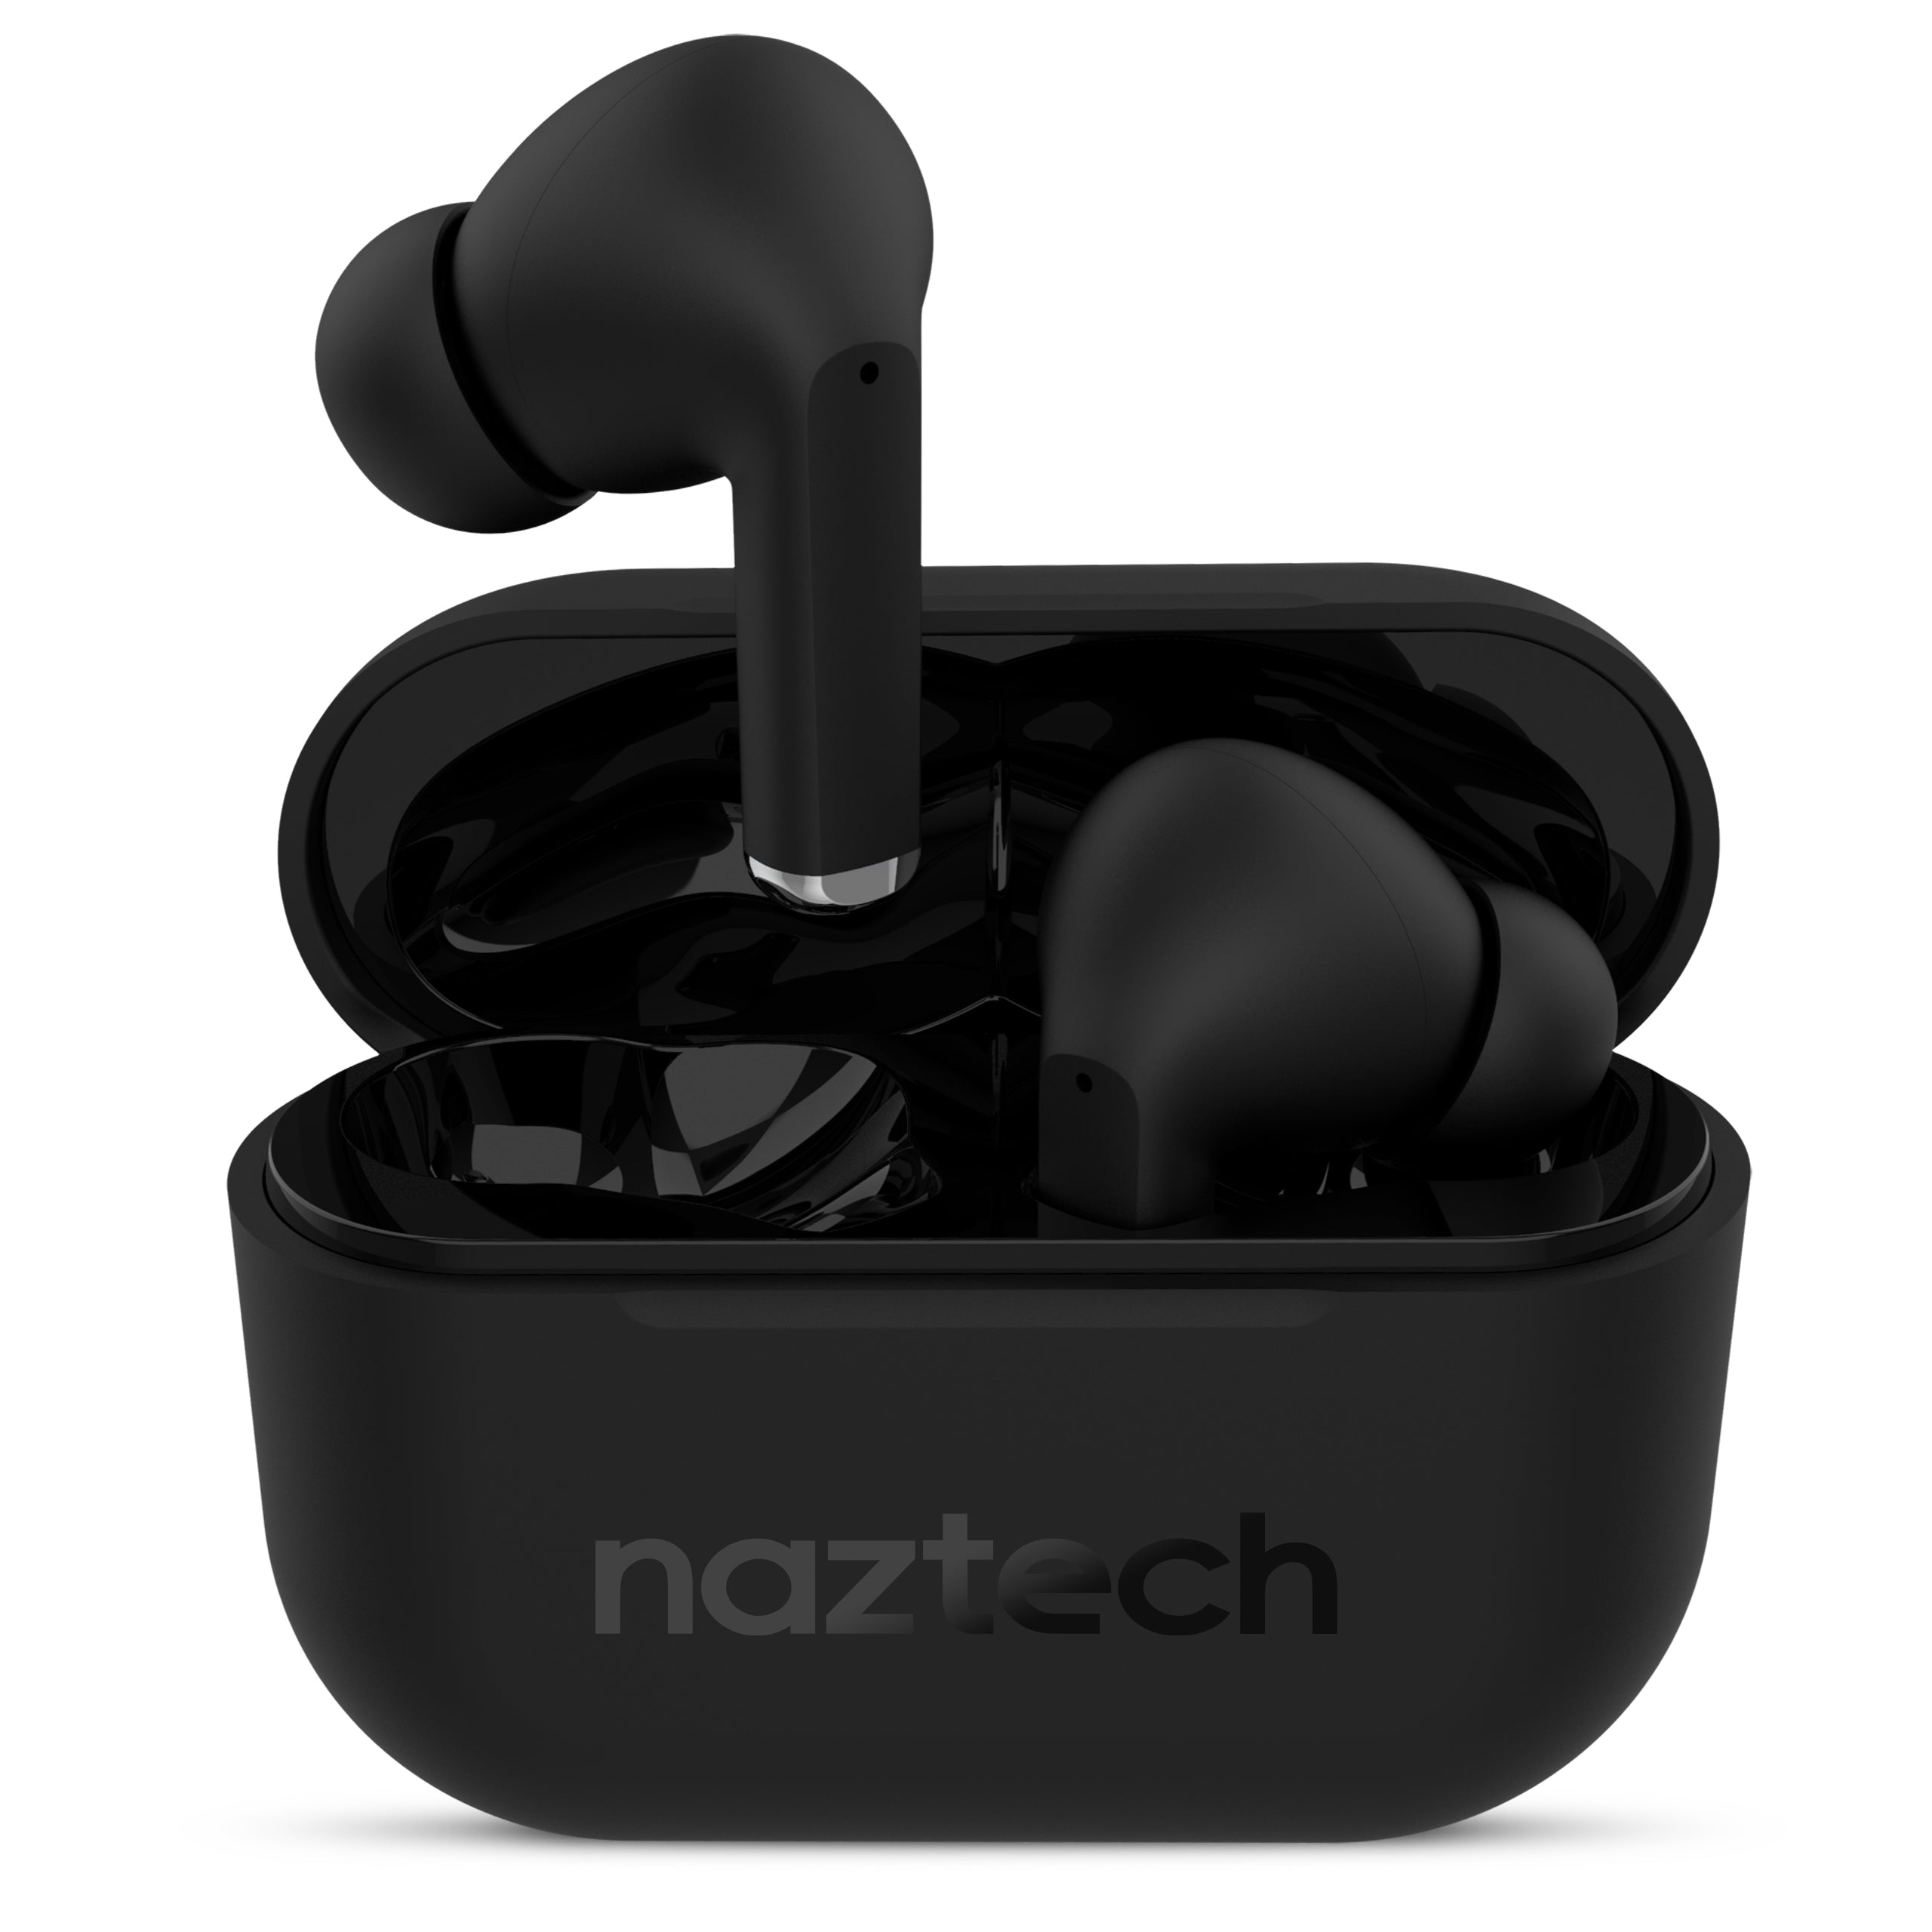 Naztech Xpods Pro TWS with Wireless Charging Case - Black